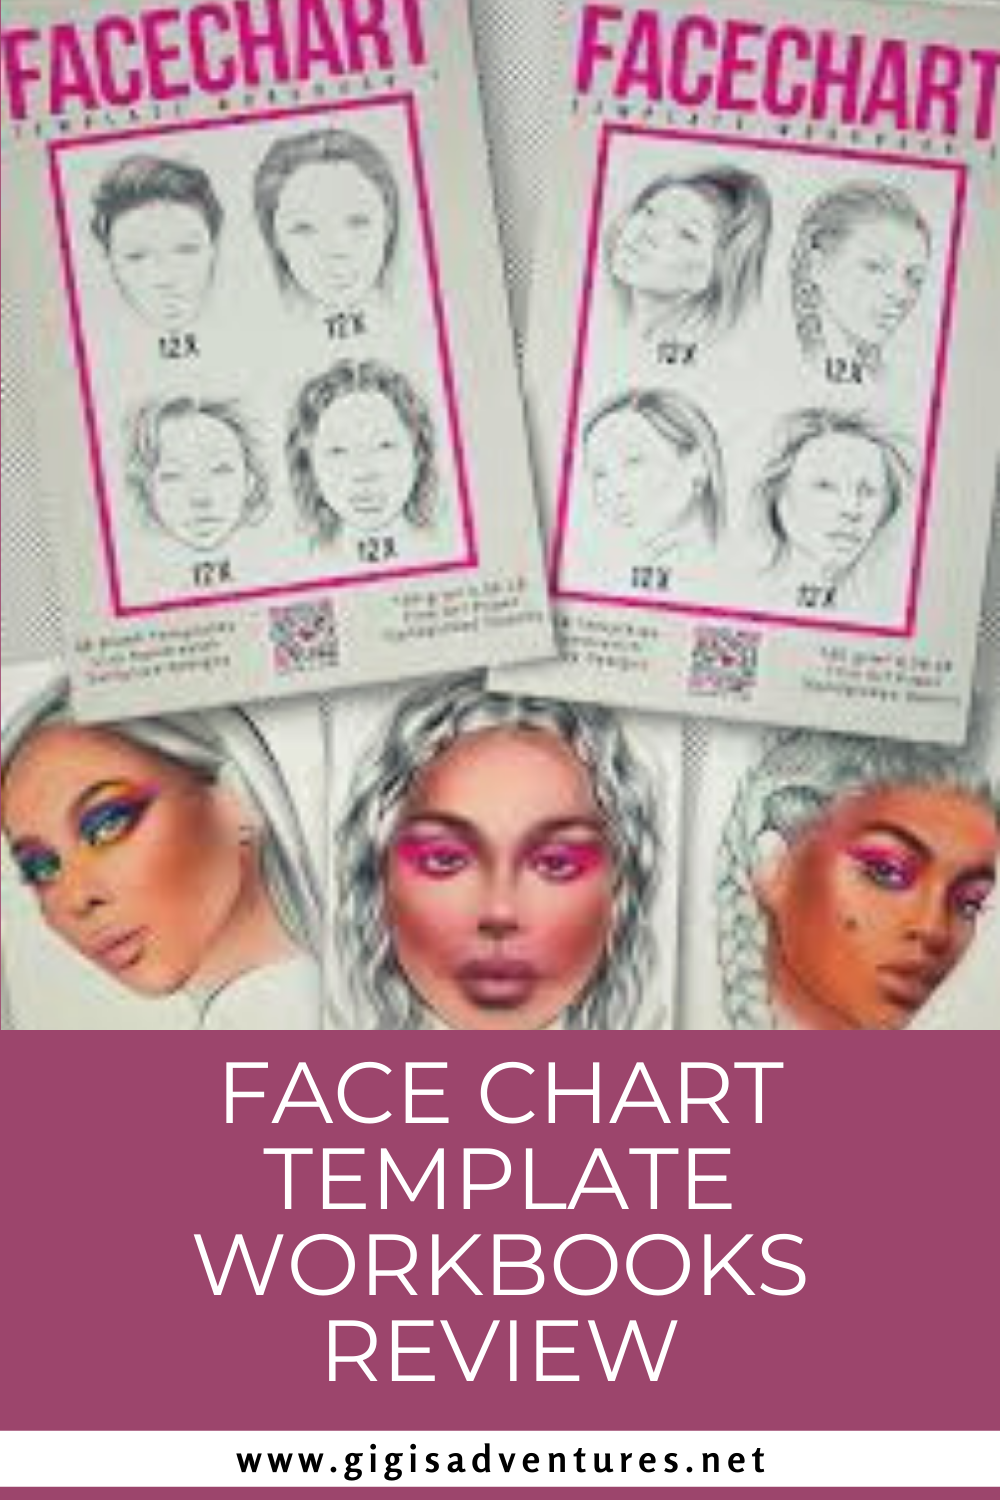 Liza Kondrevich's Face Chart Template Workbooks | Are They Worth It?